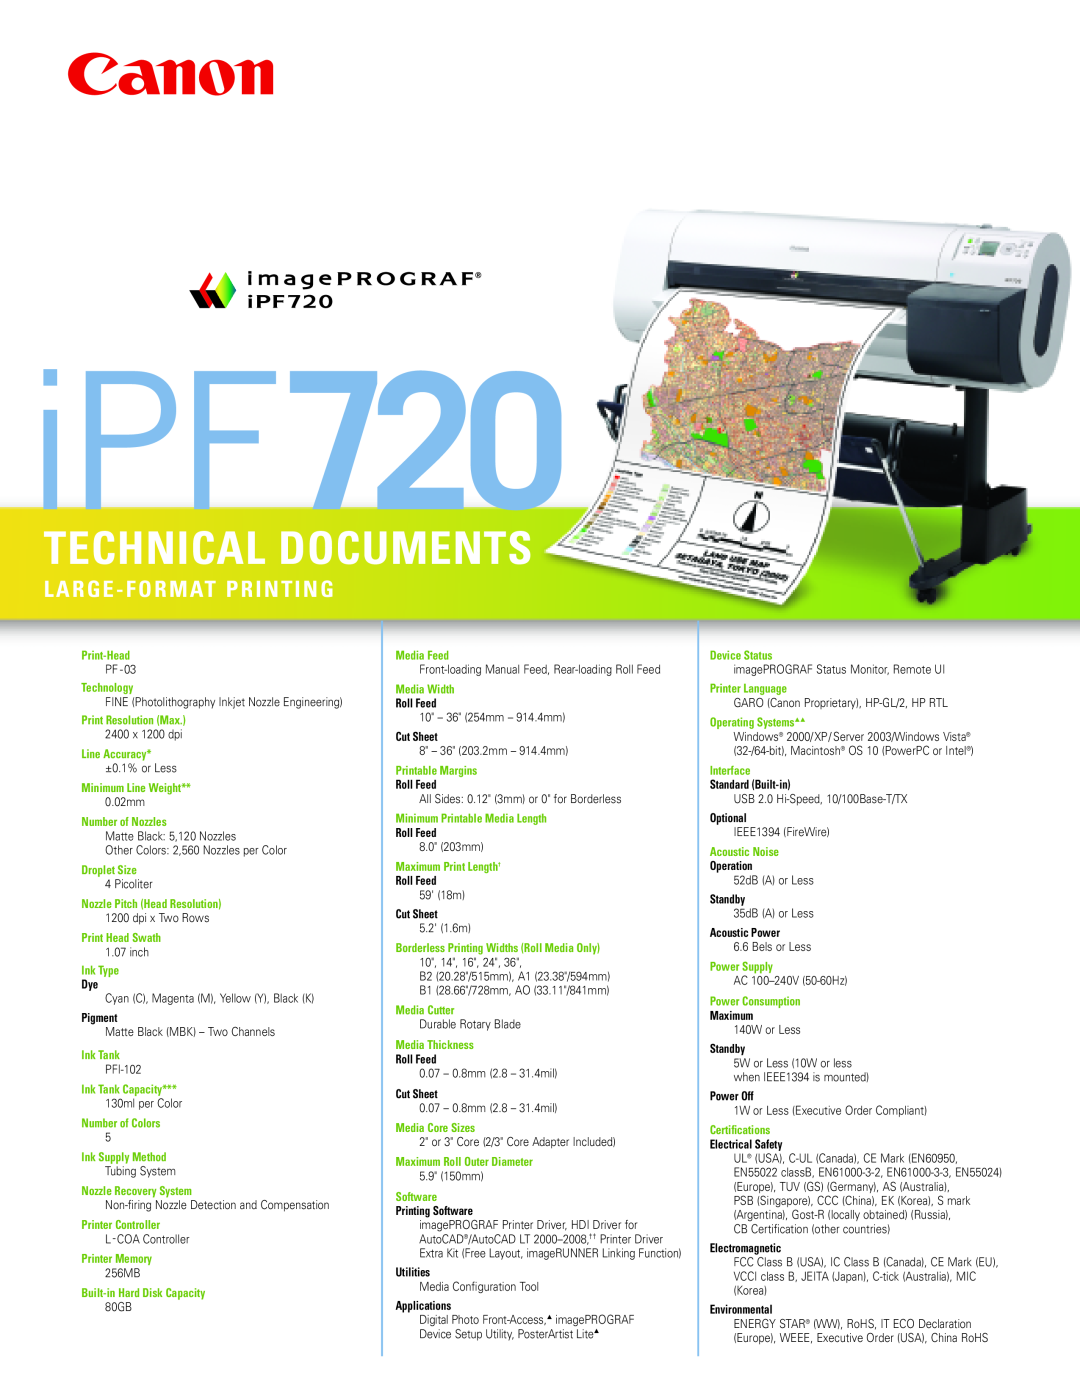 Canon IPF720 manual iPF720, Technical Documen Ts, Large-Format Prin Ting 